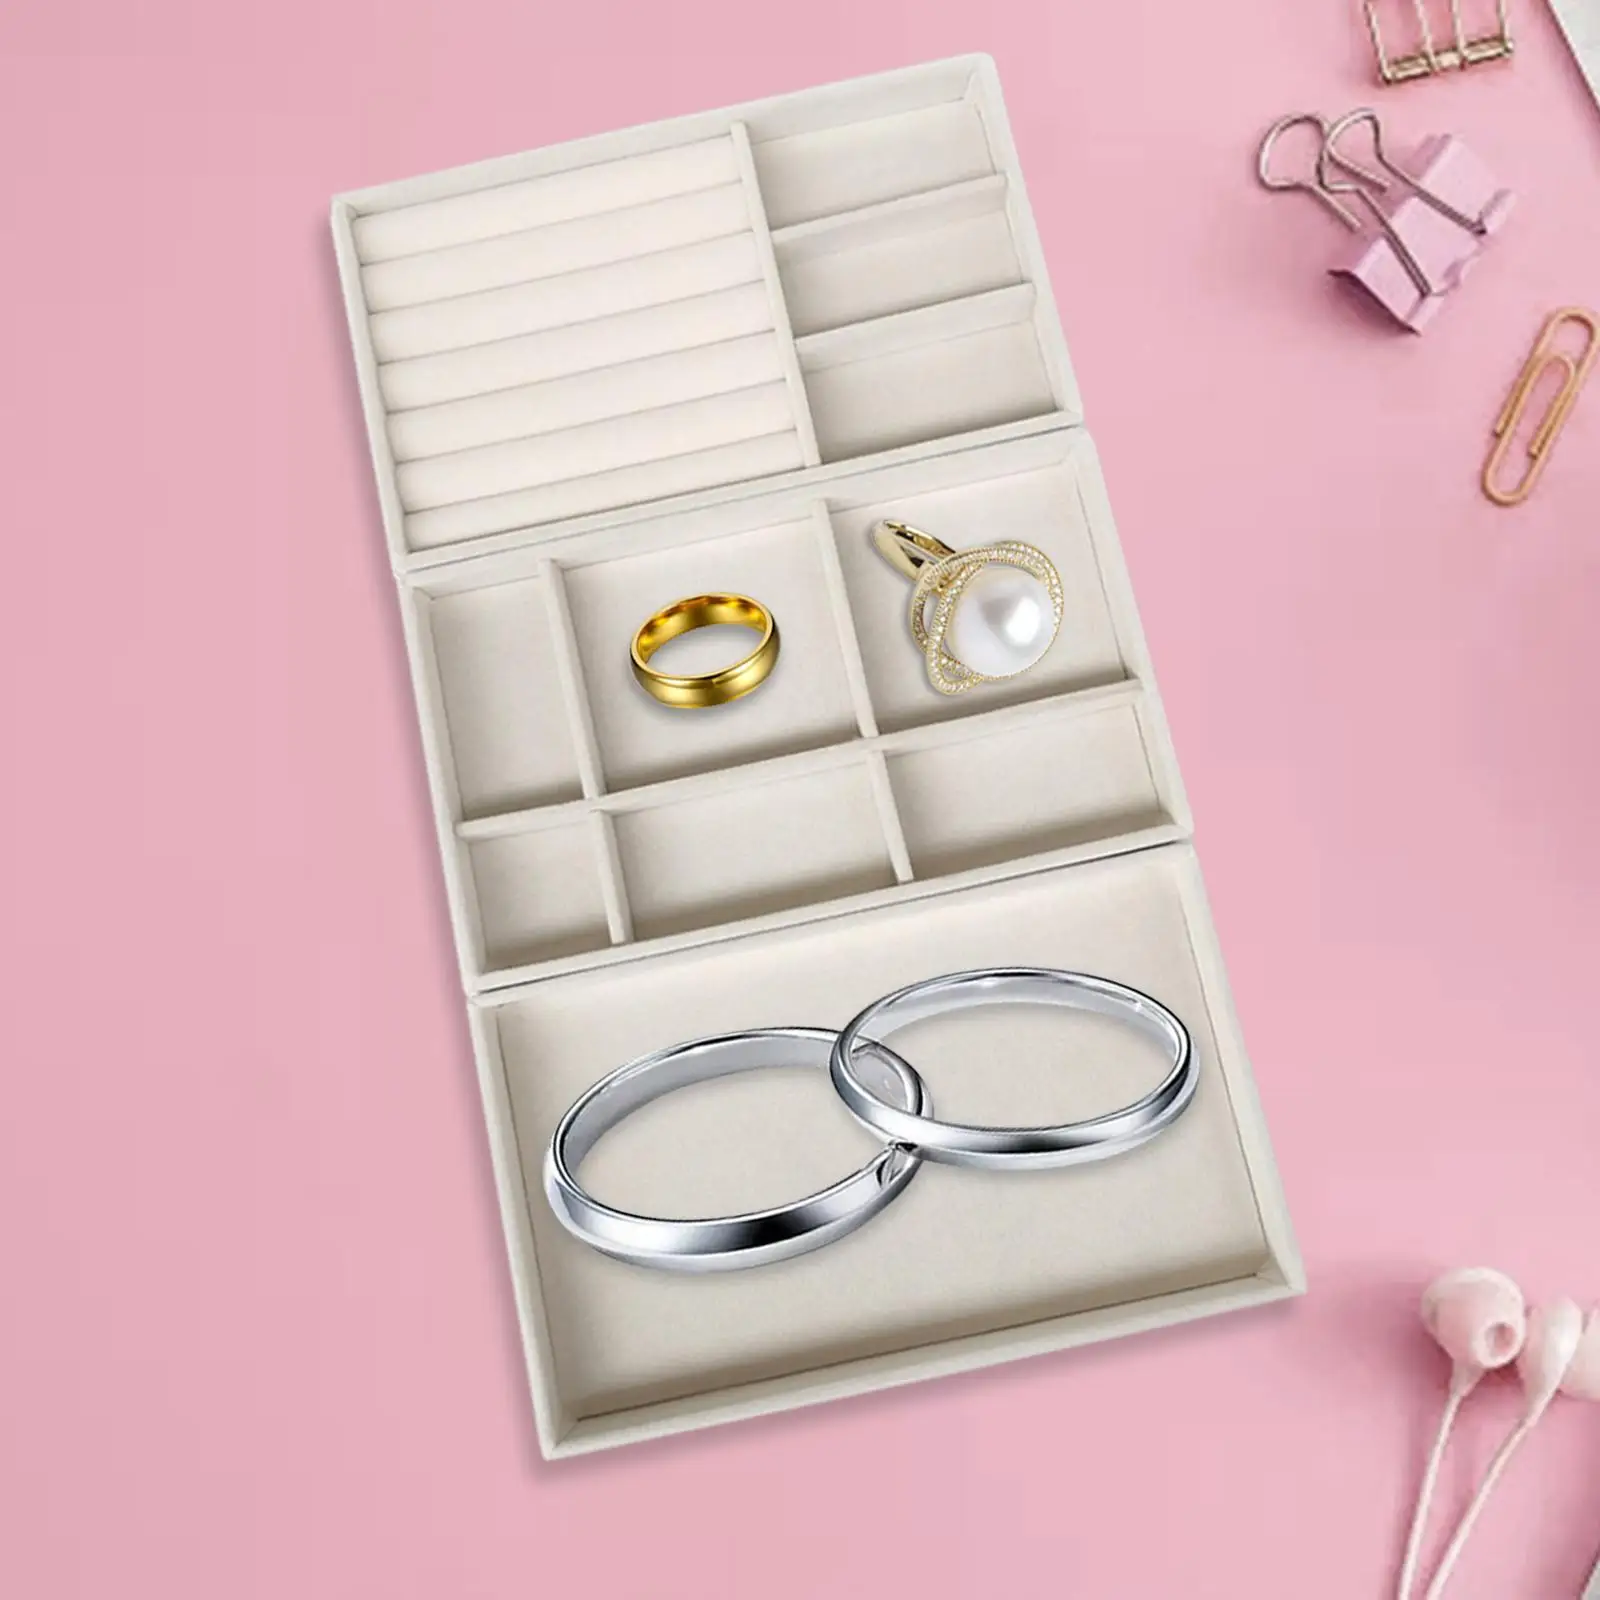 3 Pieces Stackable Jewelry Trays Organizer Display Case Box Drawer Inserts Showcase Container for Necklace Bracelet Brooch Rings